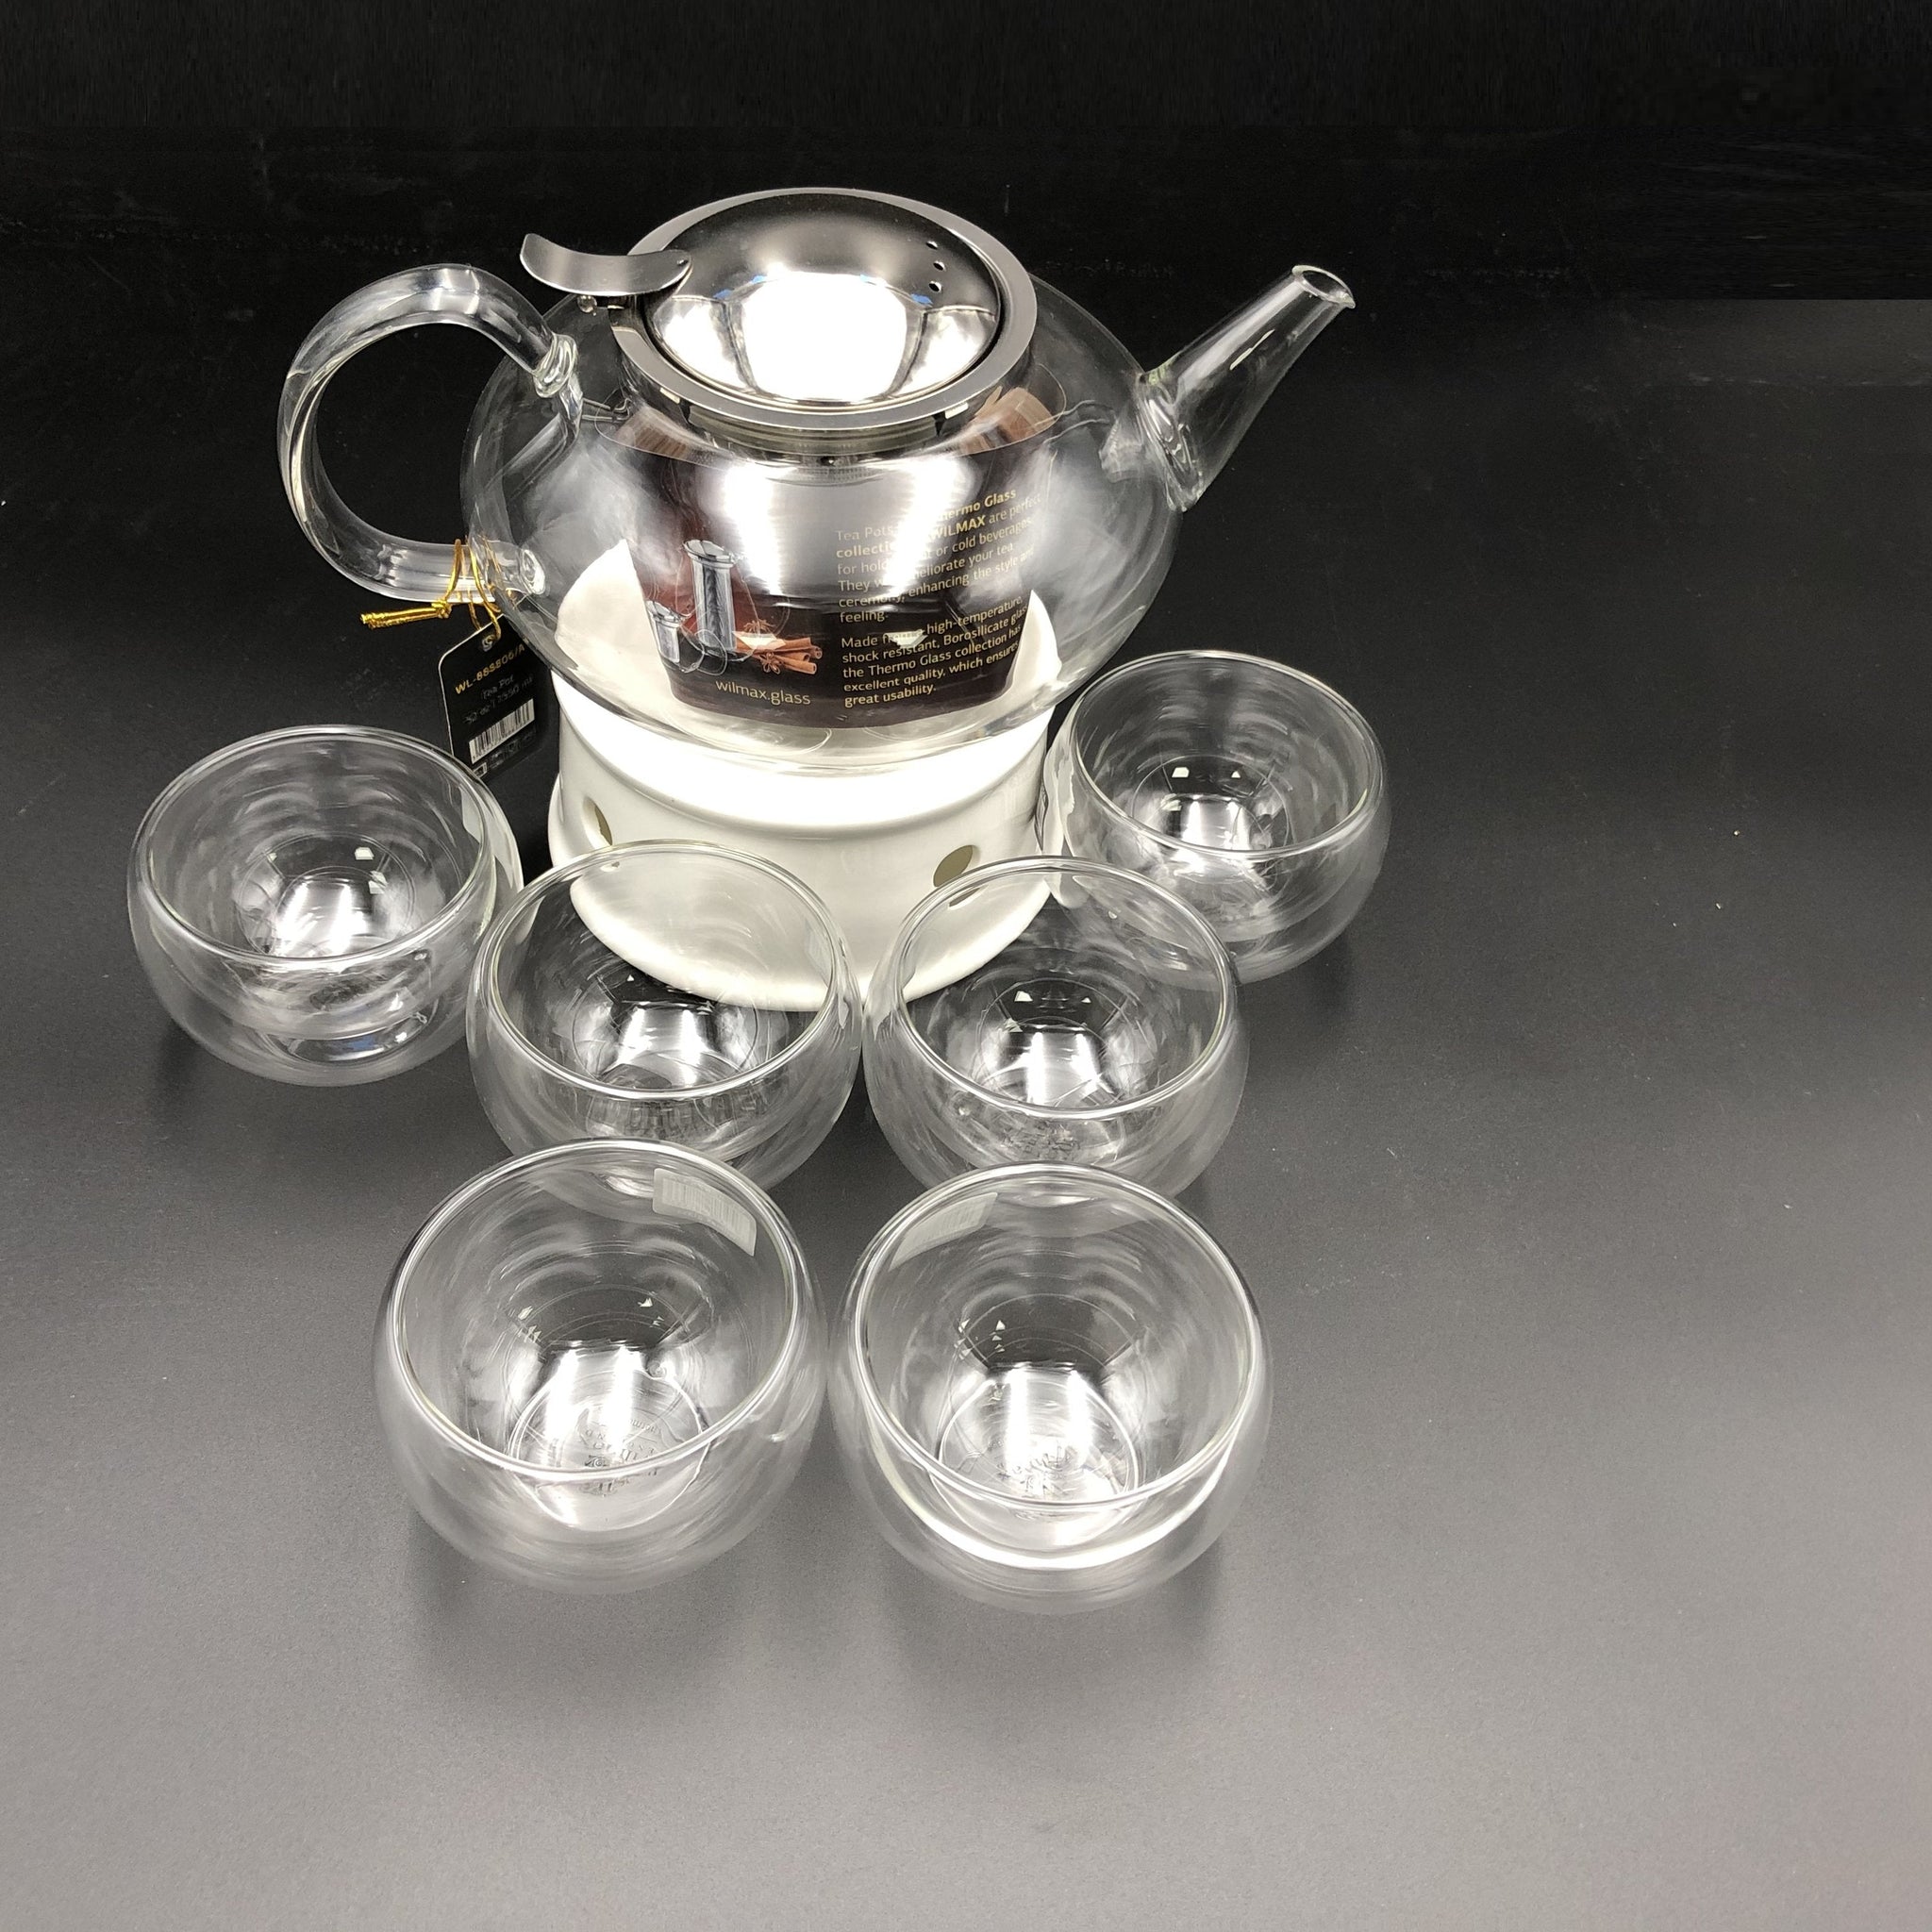 Large Asian Tea Thermo Set With 6 Bowls For Serving And A Porcelain Warming Stand by Wilmax Porcelain